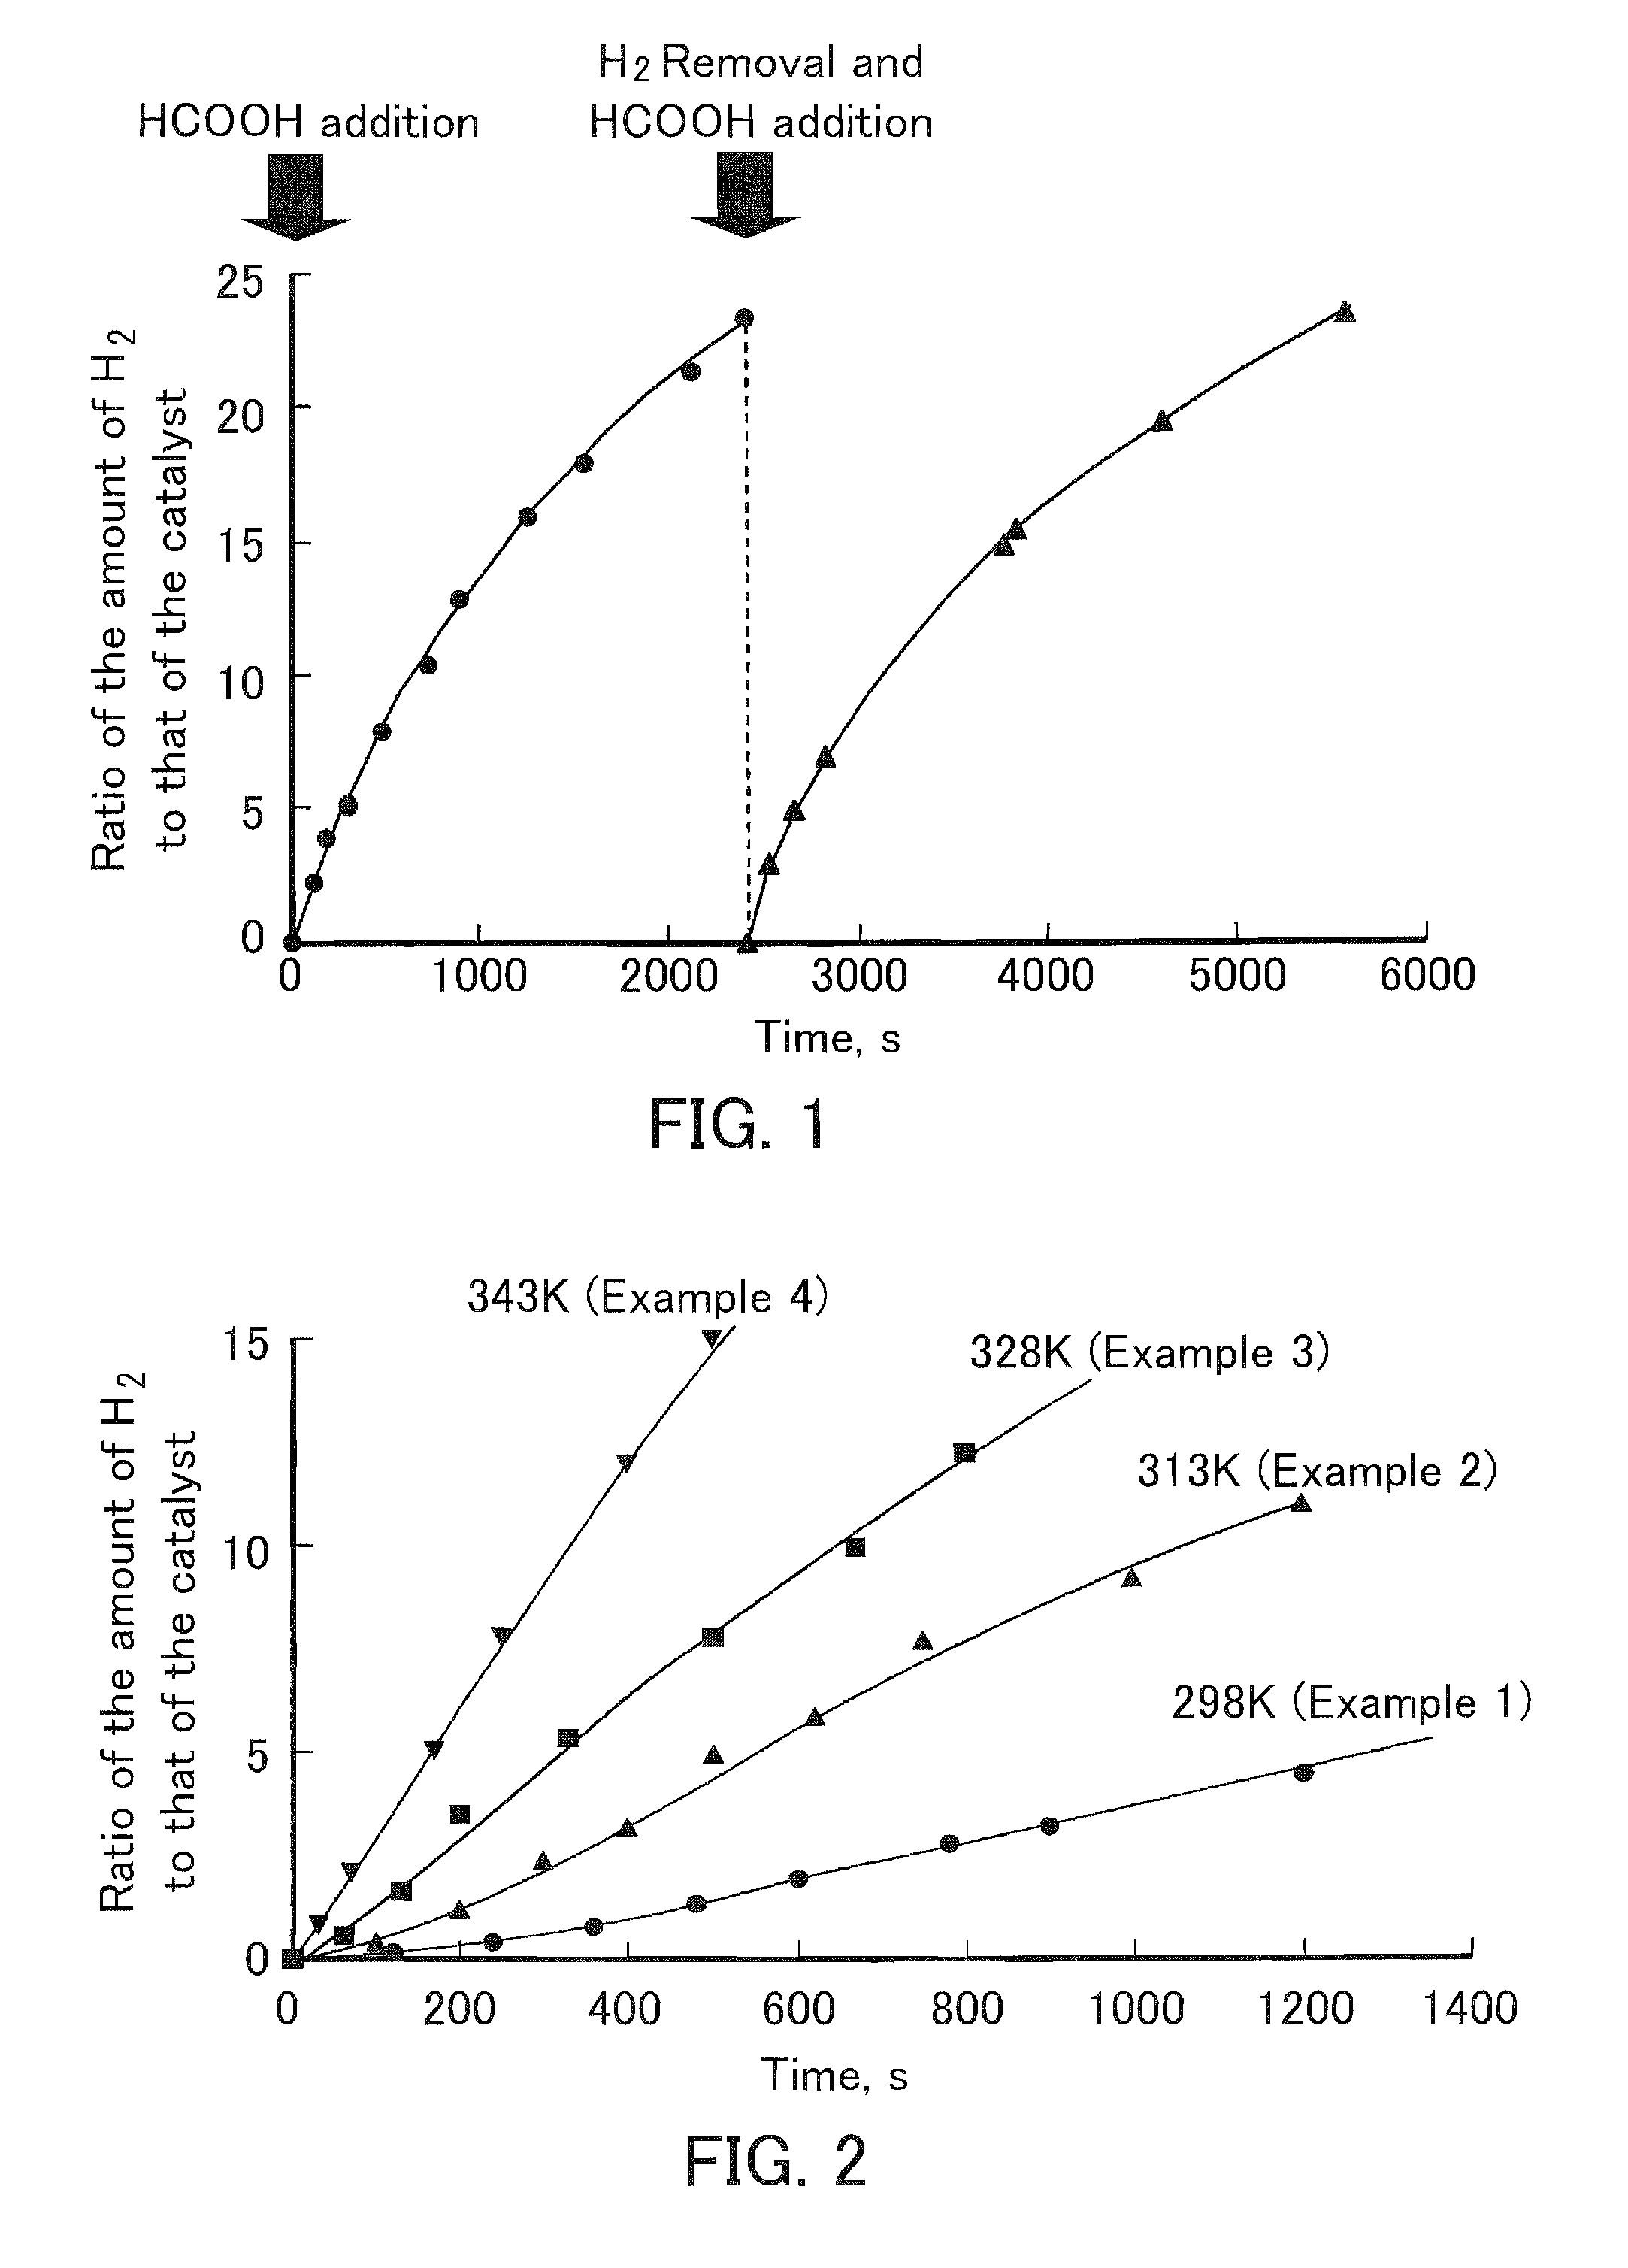 Catalyst for decomposition of formic acid, method for decomposing formic acid, process for producing hydrogen, apparatus for producing and decomposing formic acid, and method for storing and generating hydrogen